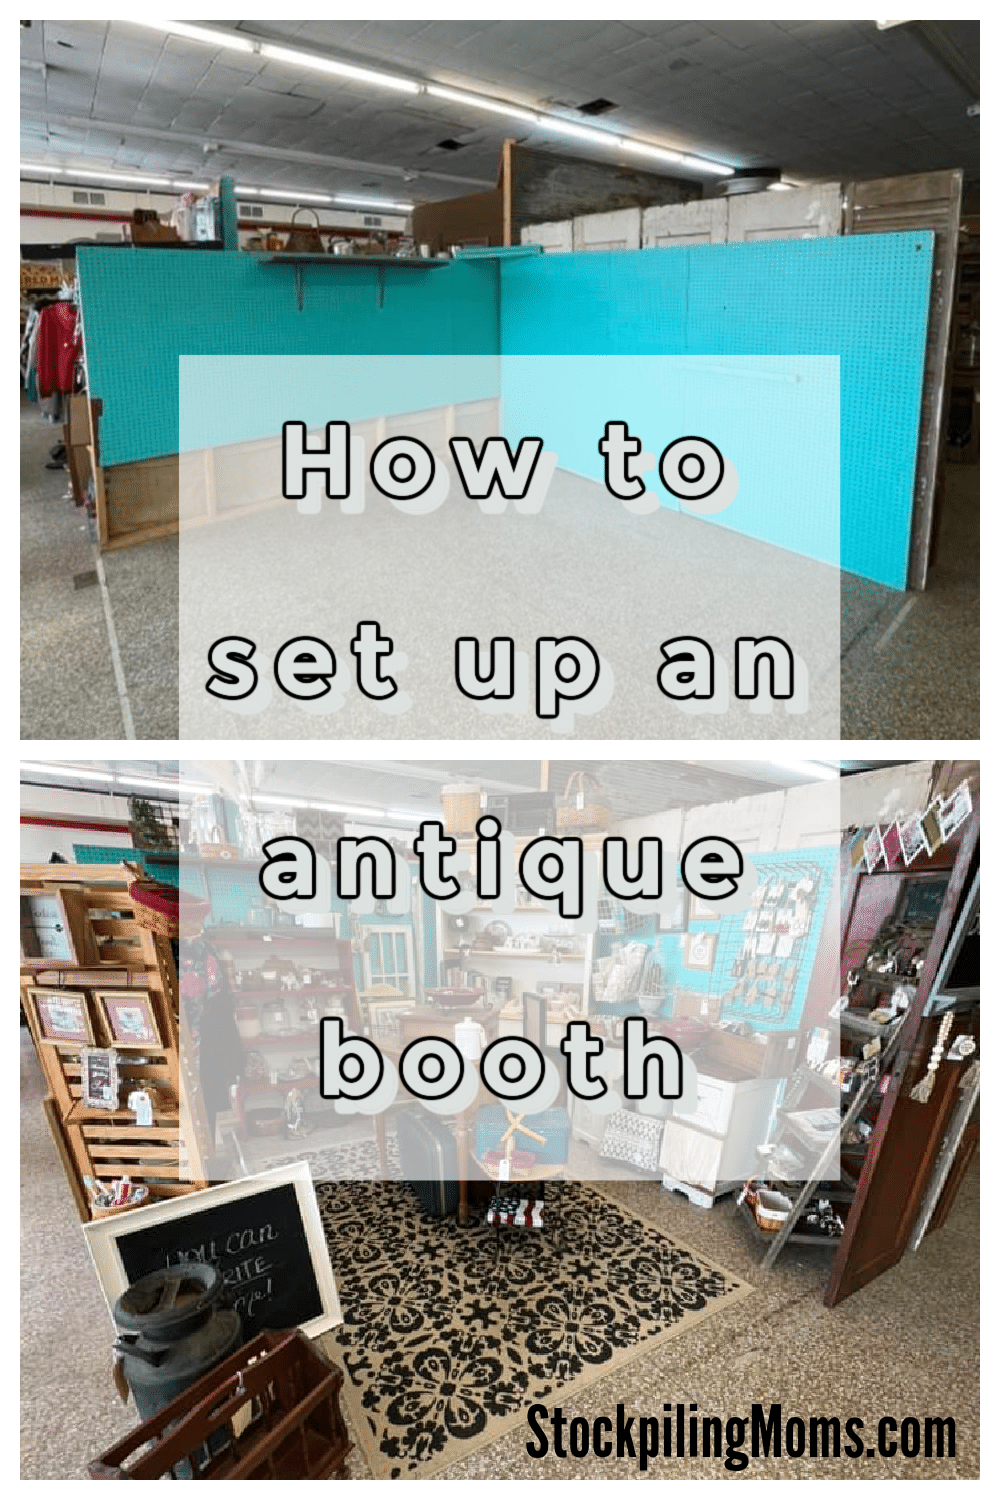 How to set up an antique booth